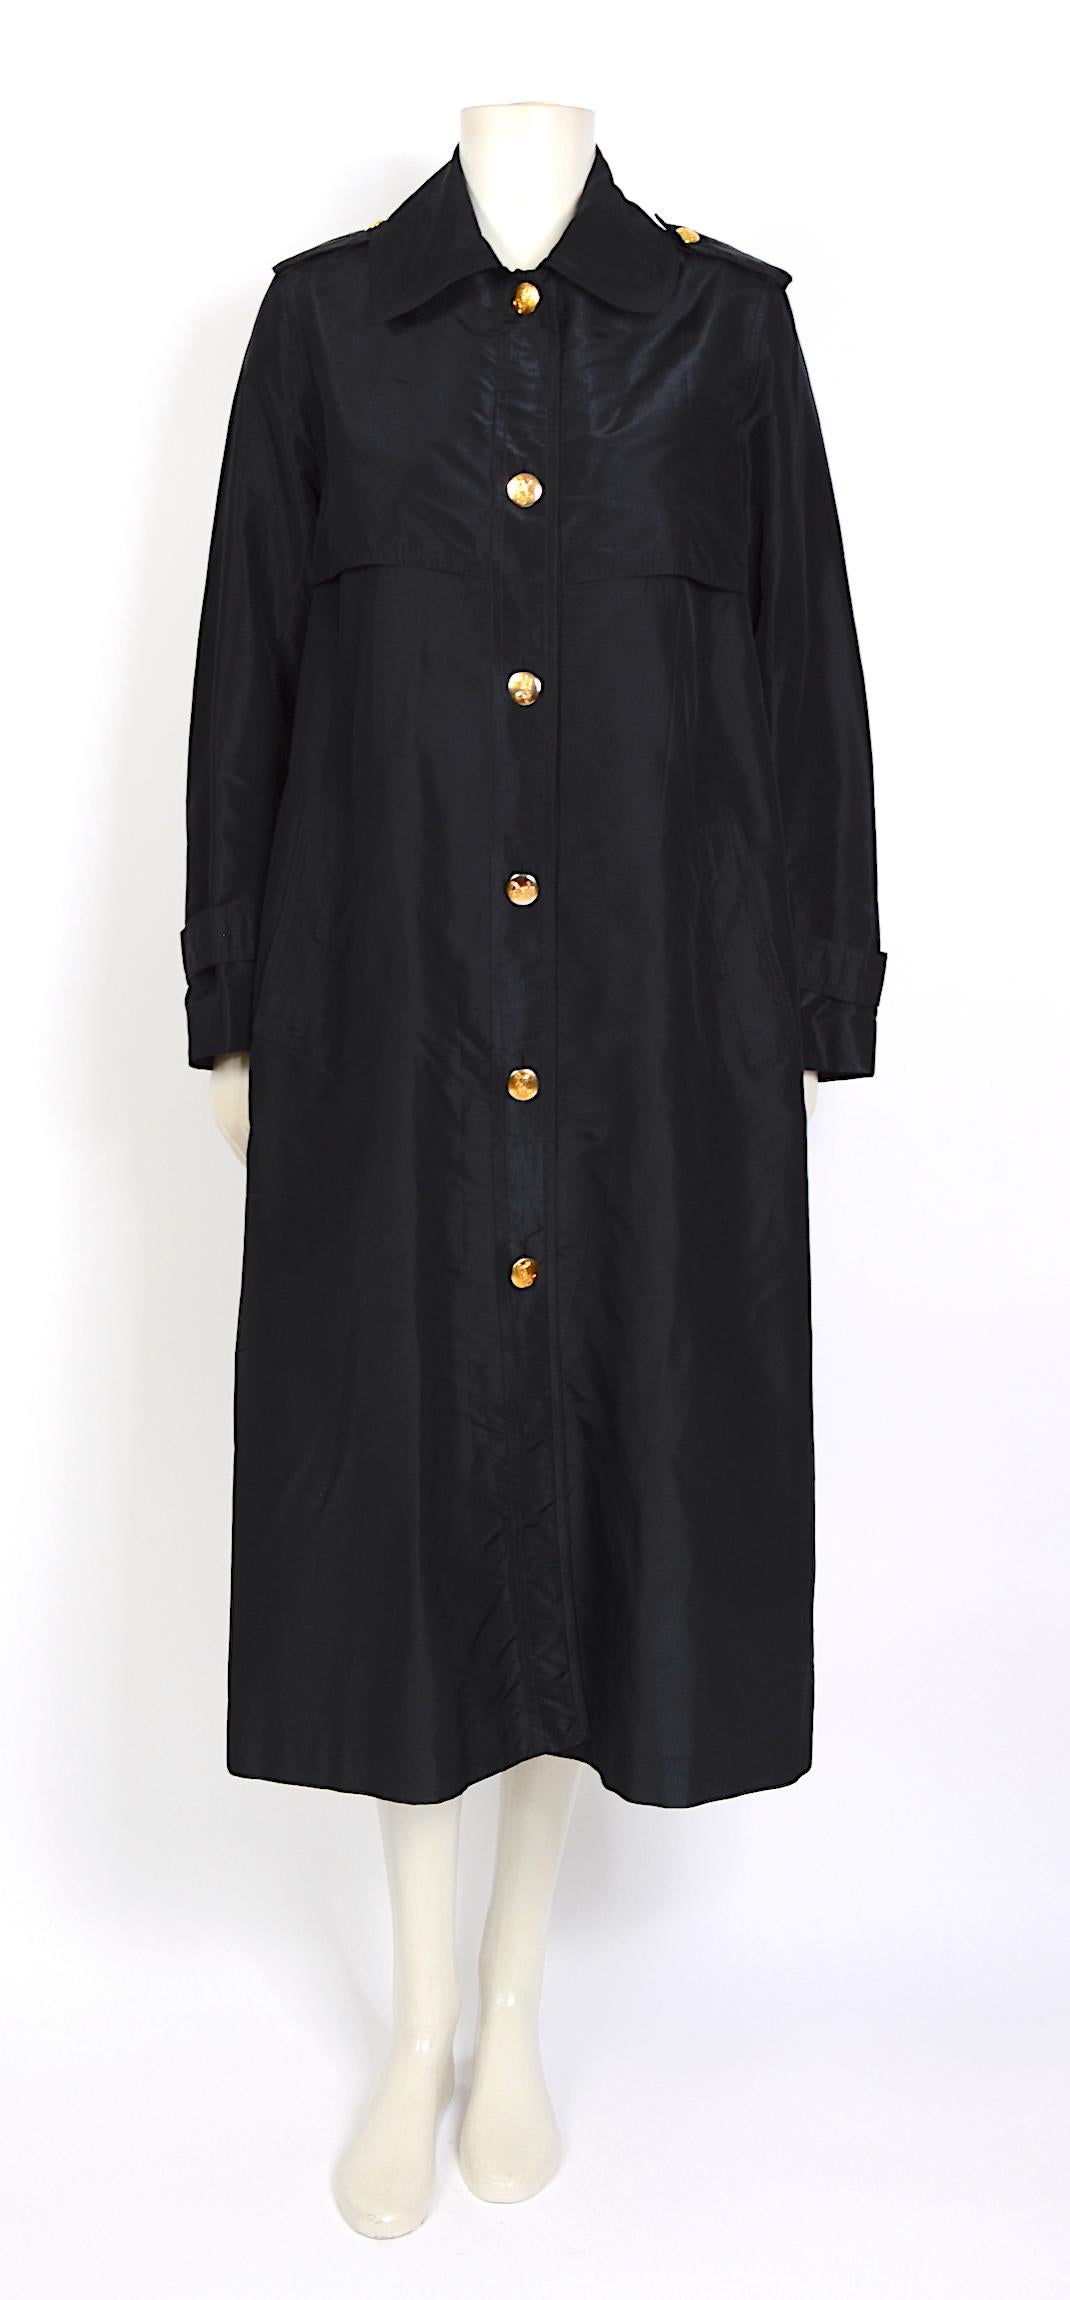 Celine vintage signature gold buttons and black silk crispy taffeta coat In Good Condition For Sale In Antwerpen, Vlaams Gewest